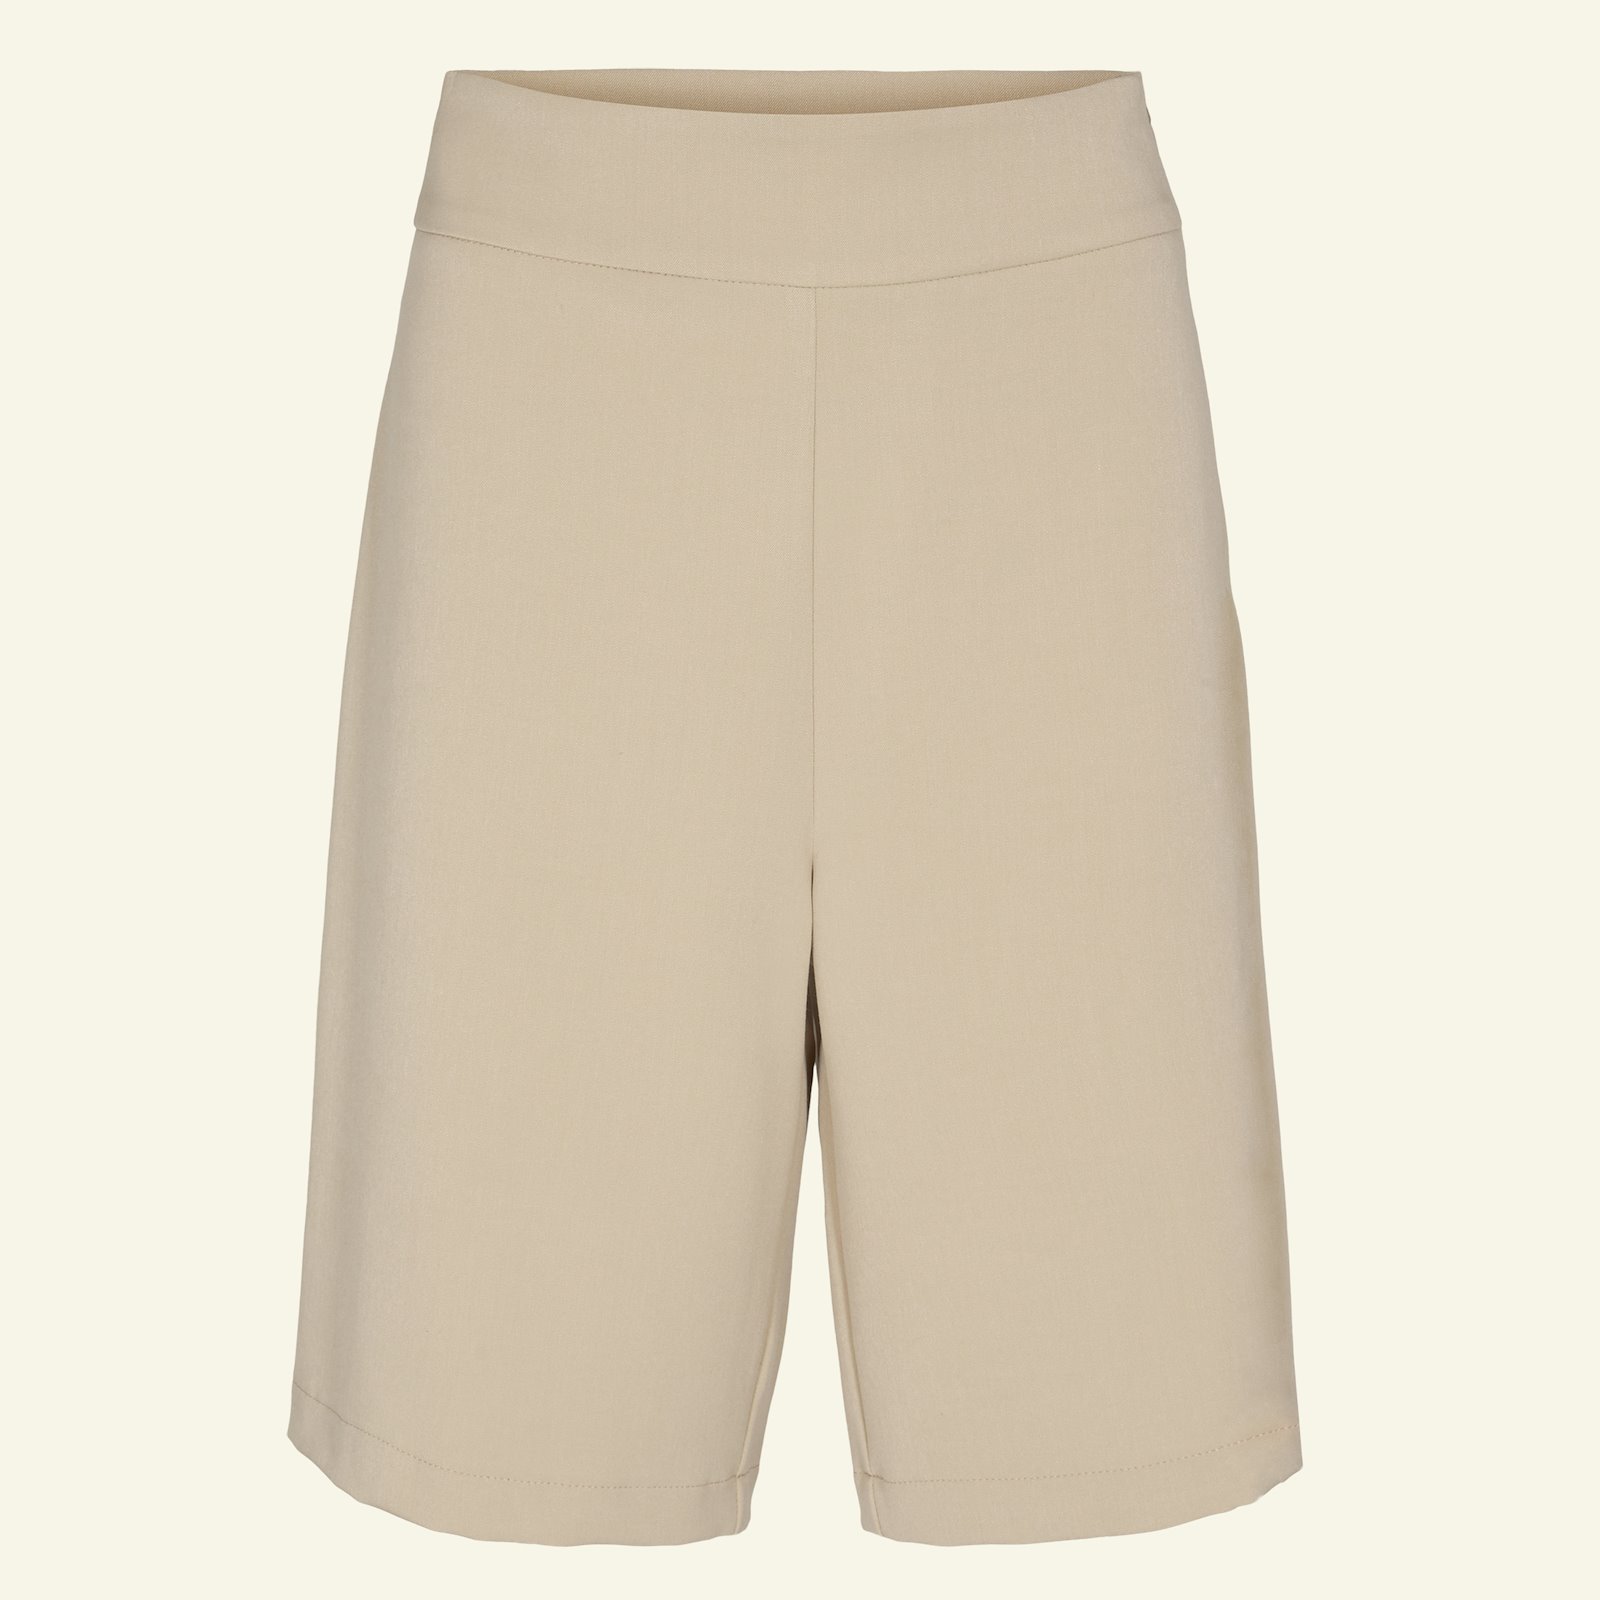 Highwaist and wide legs trousers, 42/14 p20052_460857_sskit